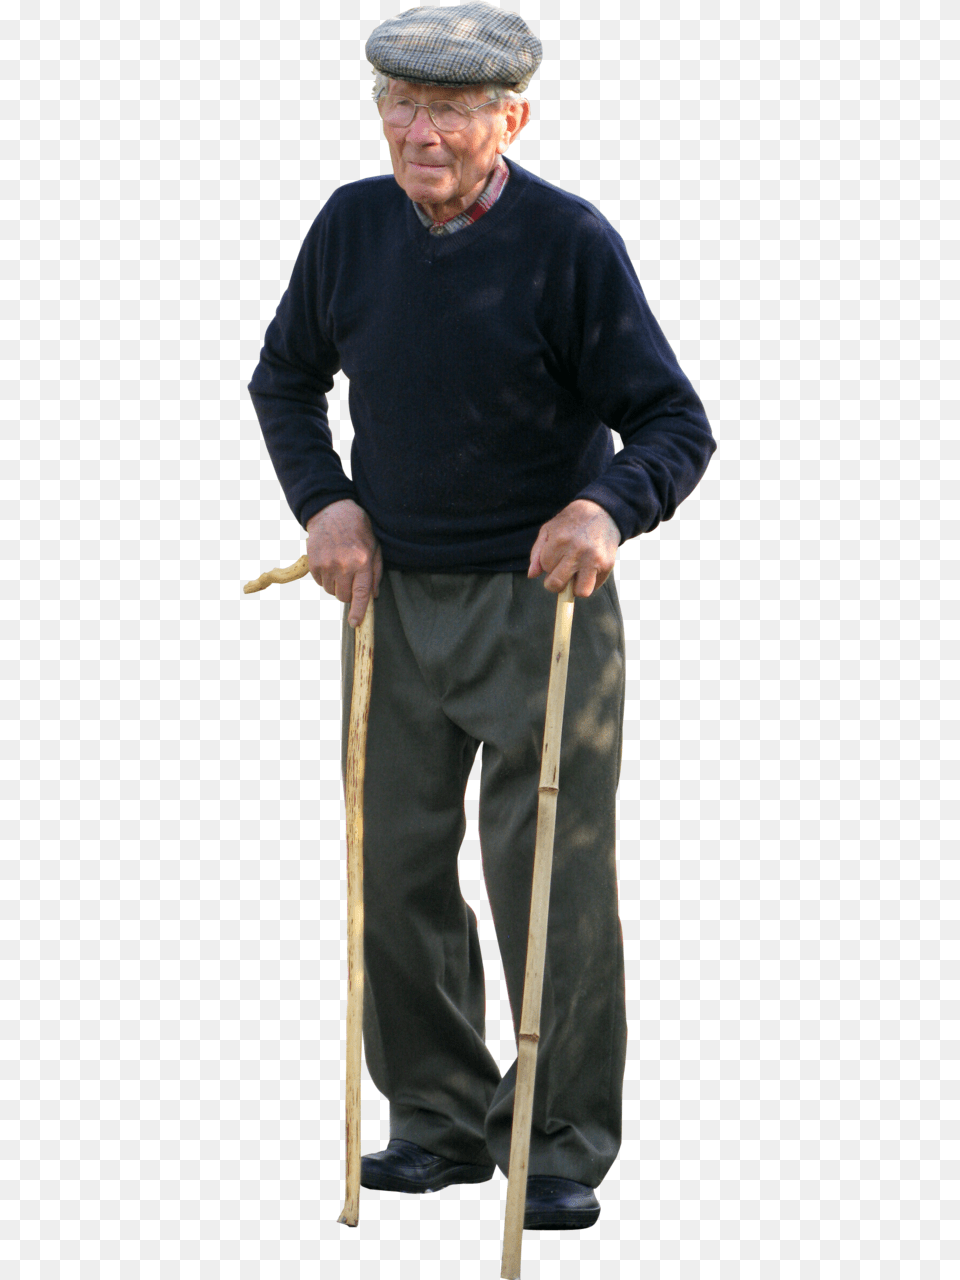 Skalgubbar Old Person Cut Out, Stick, Man, Male, Adult Png Image